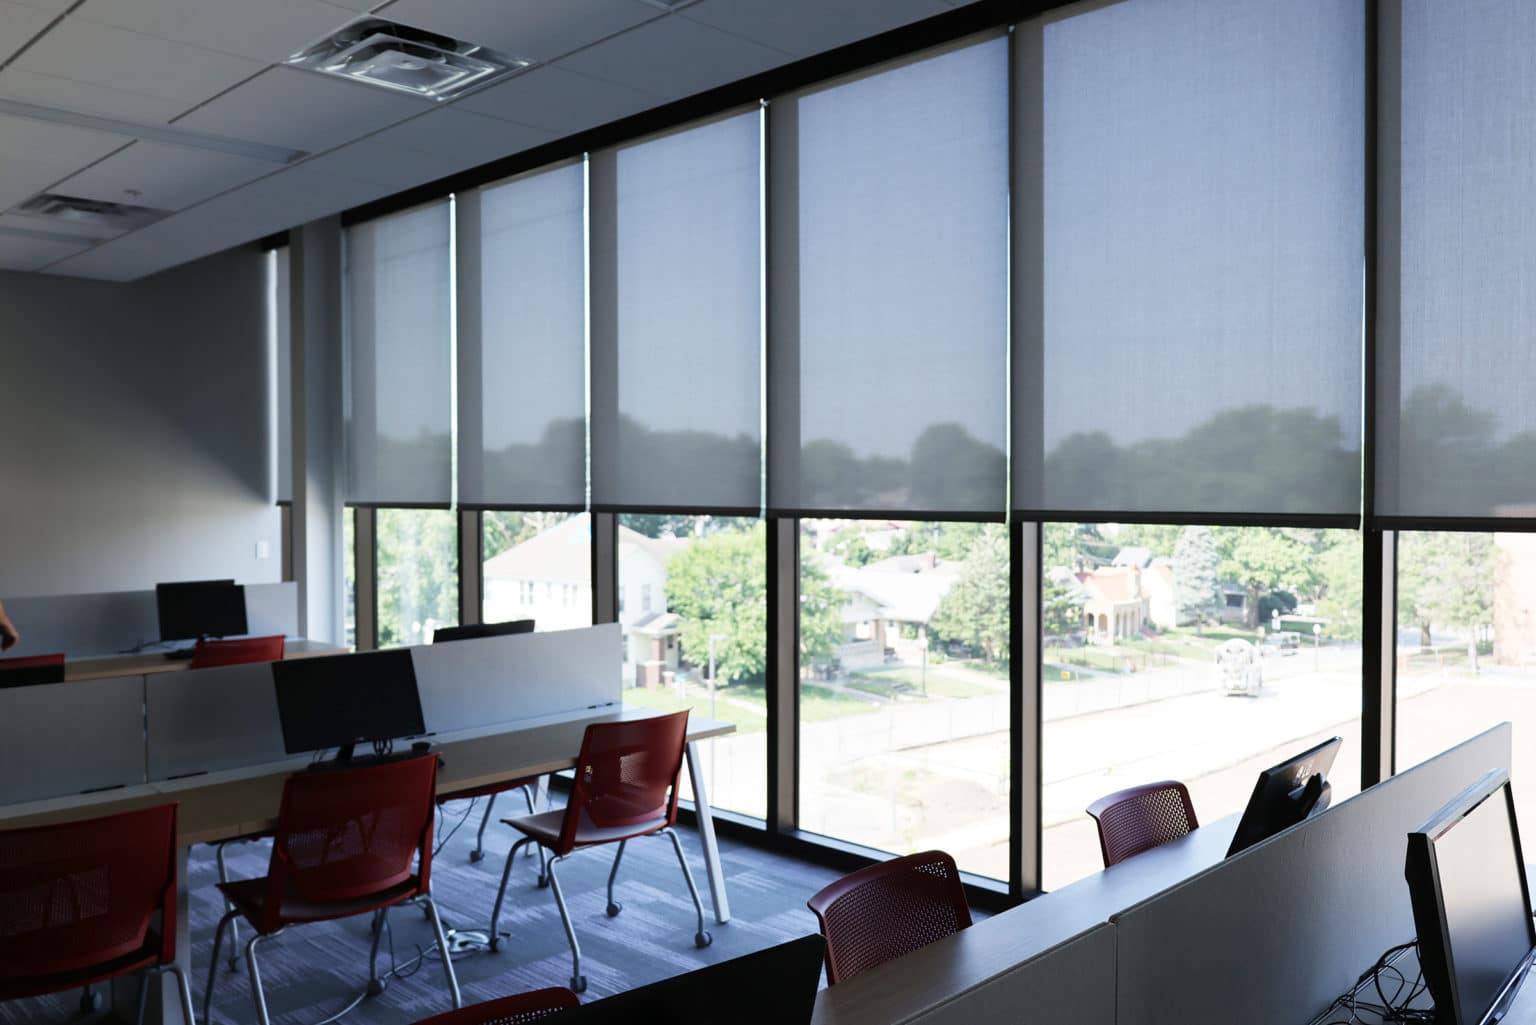 Commercial rollershades in a classroom at Donnelly College in Kansas City, Kansas.